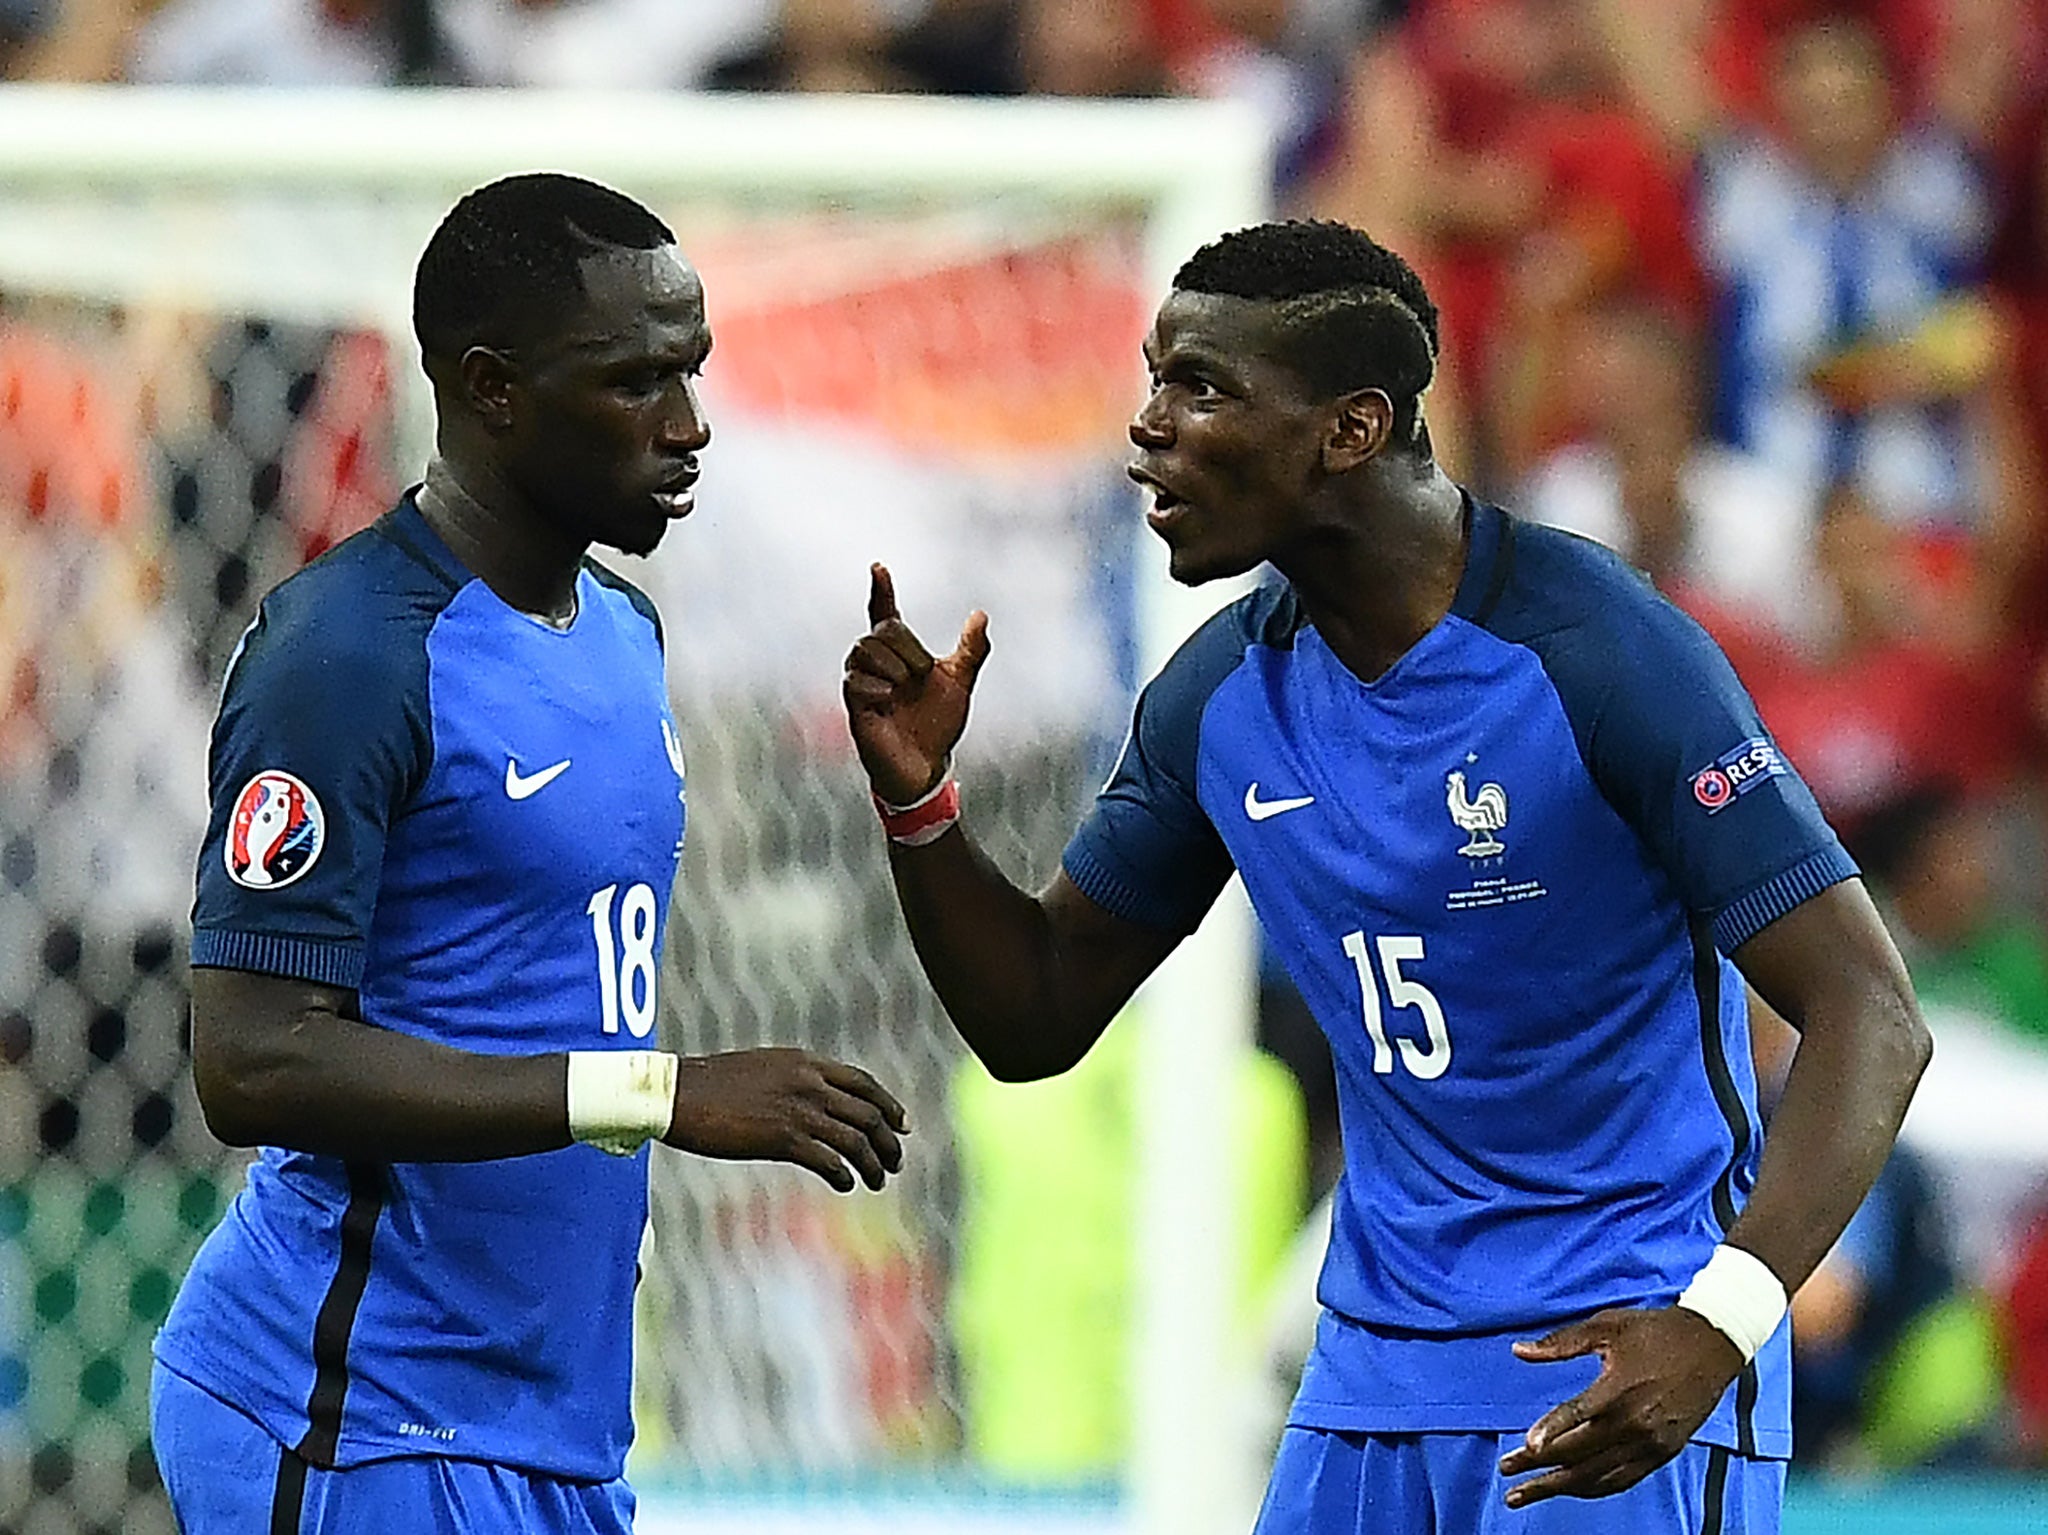 Sissoko and Pogba were both on the losing side in Sunday's European Championship final